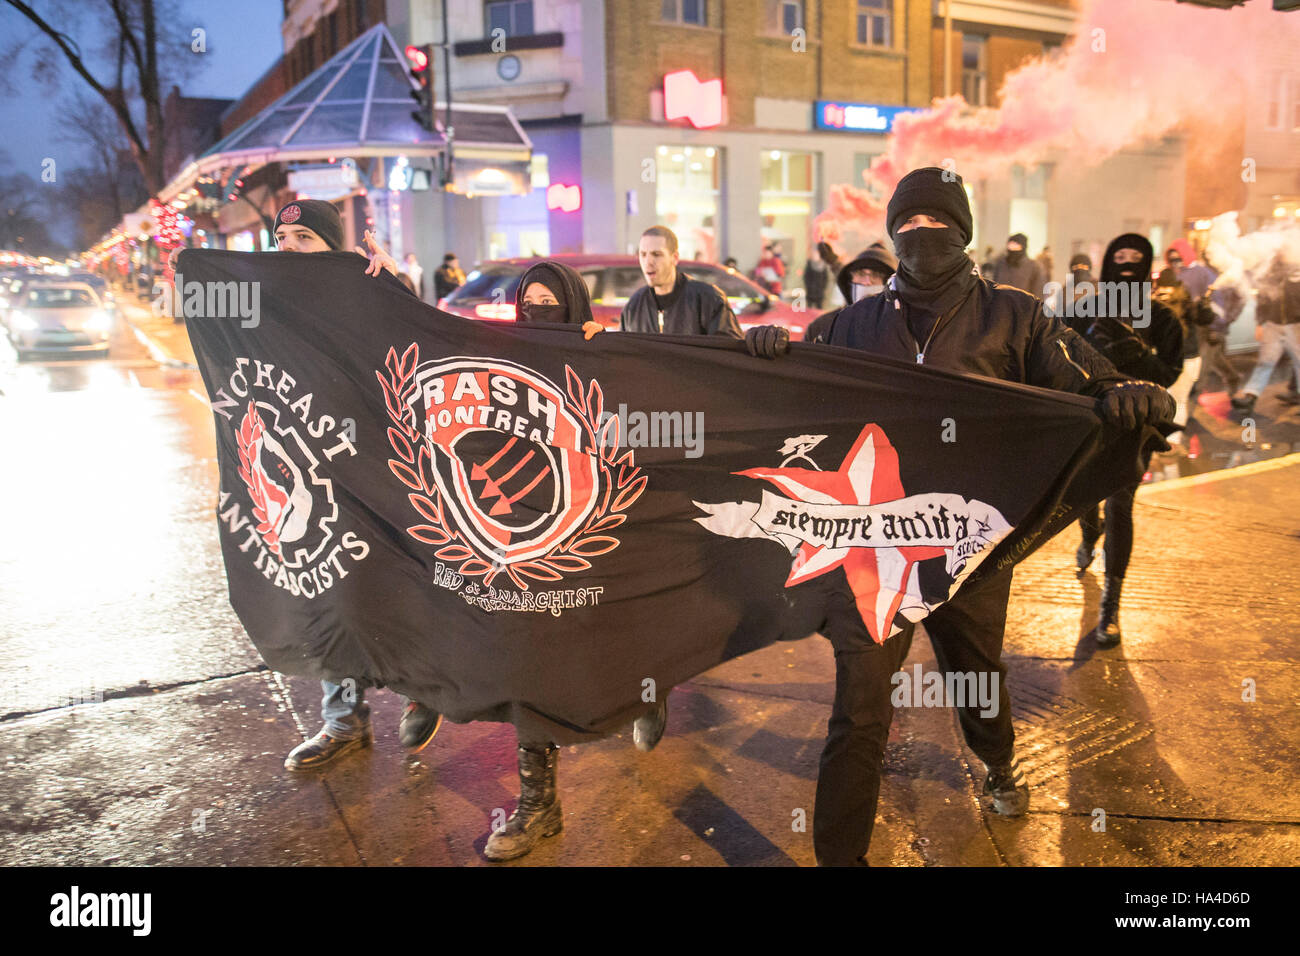 Montreal, Quebec, Canada. 26th November, 2016. Demonstrators protest against a concert by Polish black metal rock band Graveland. Protesters labelling themselves 'anti-fascists militants' were protesting what they call a racist band. Dario Ayala/Alamy Live News Stock Photo